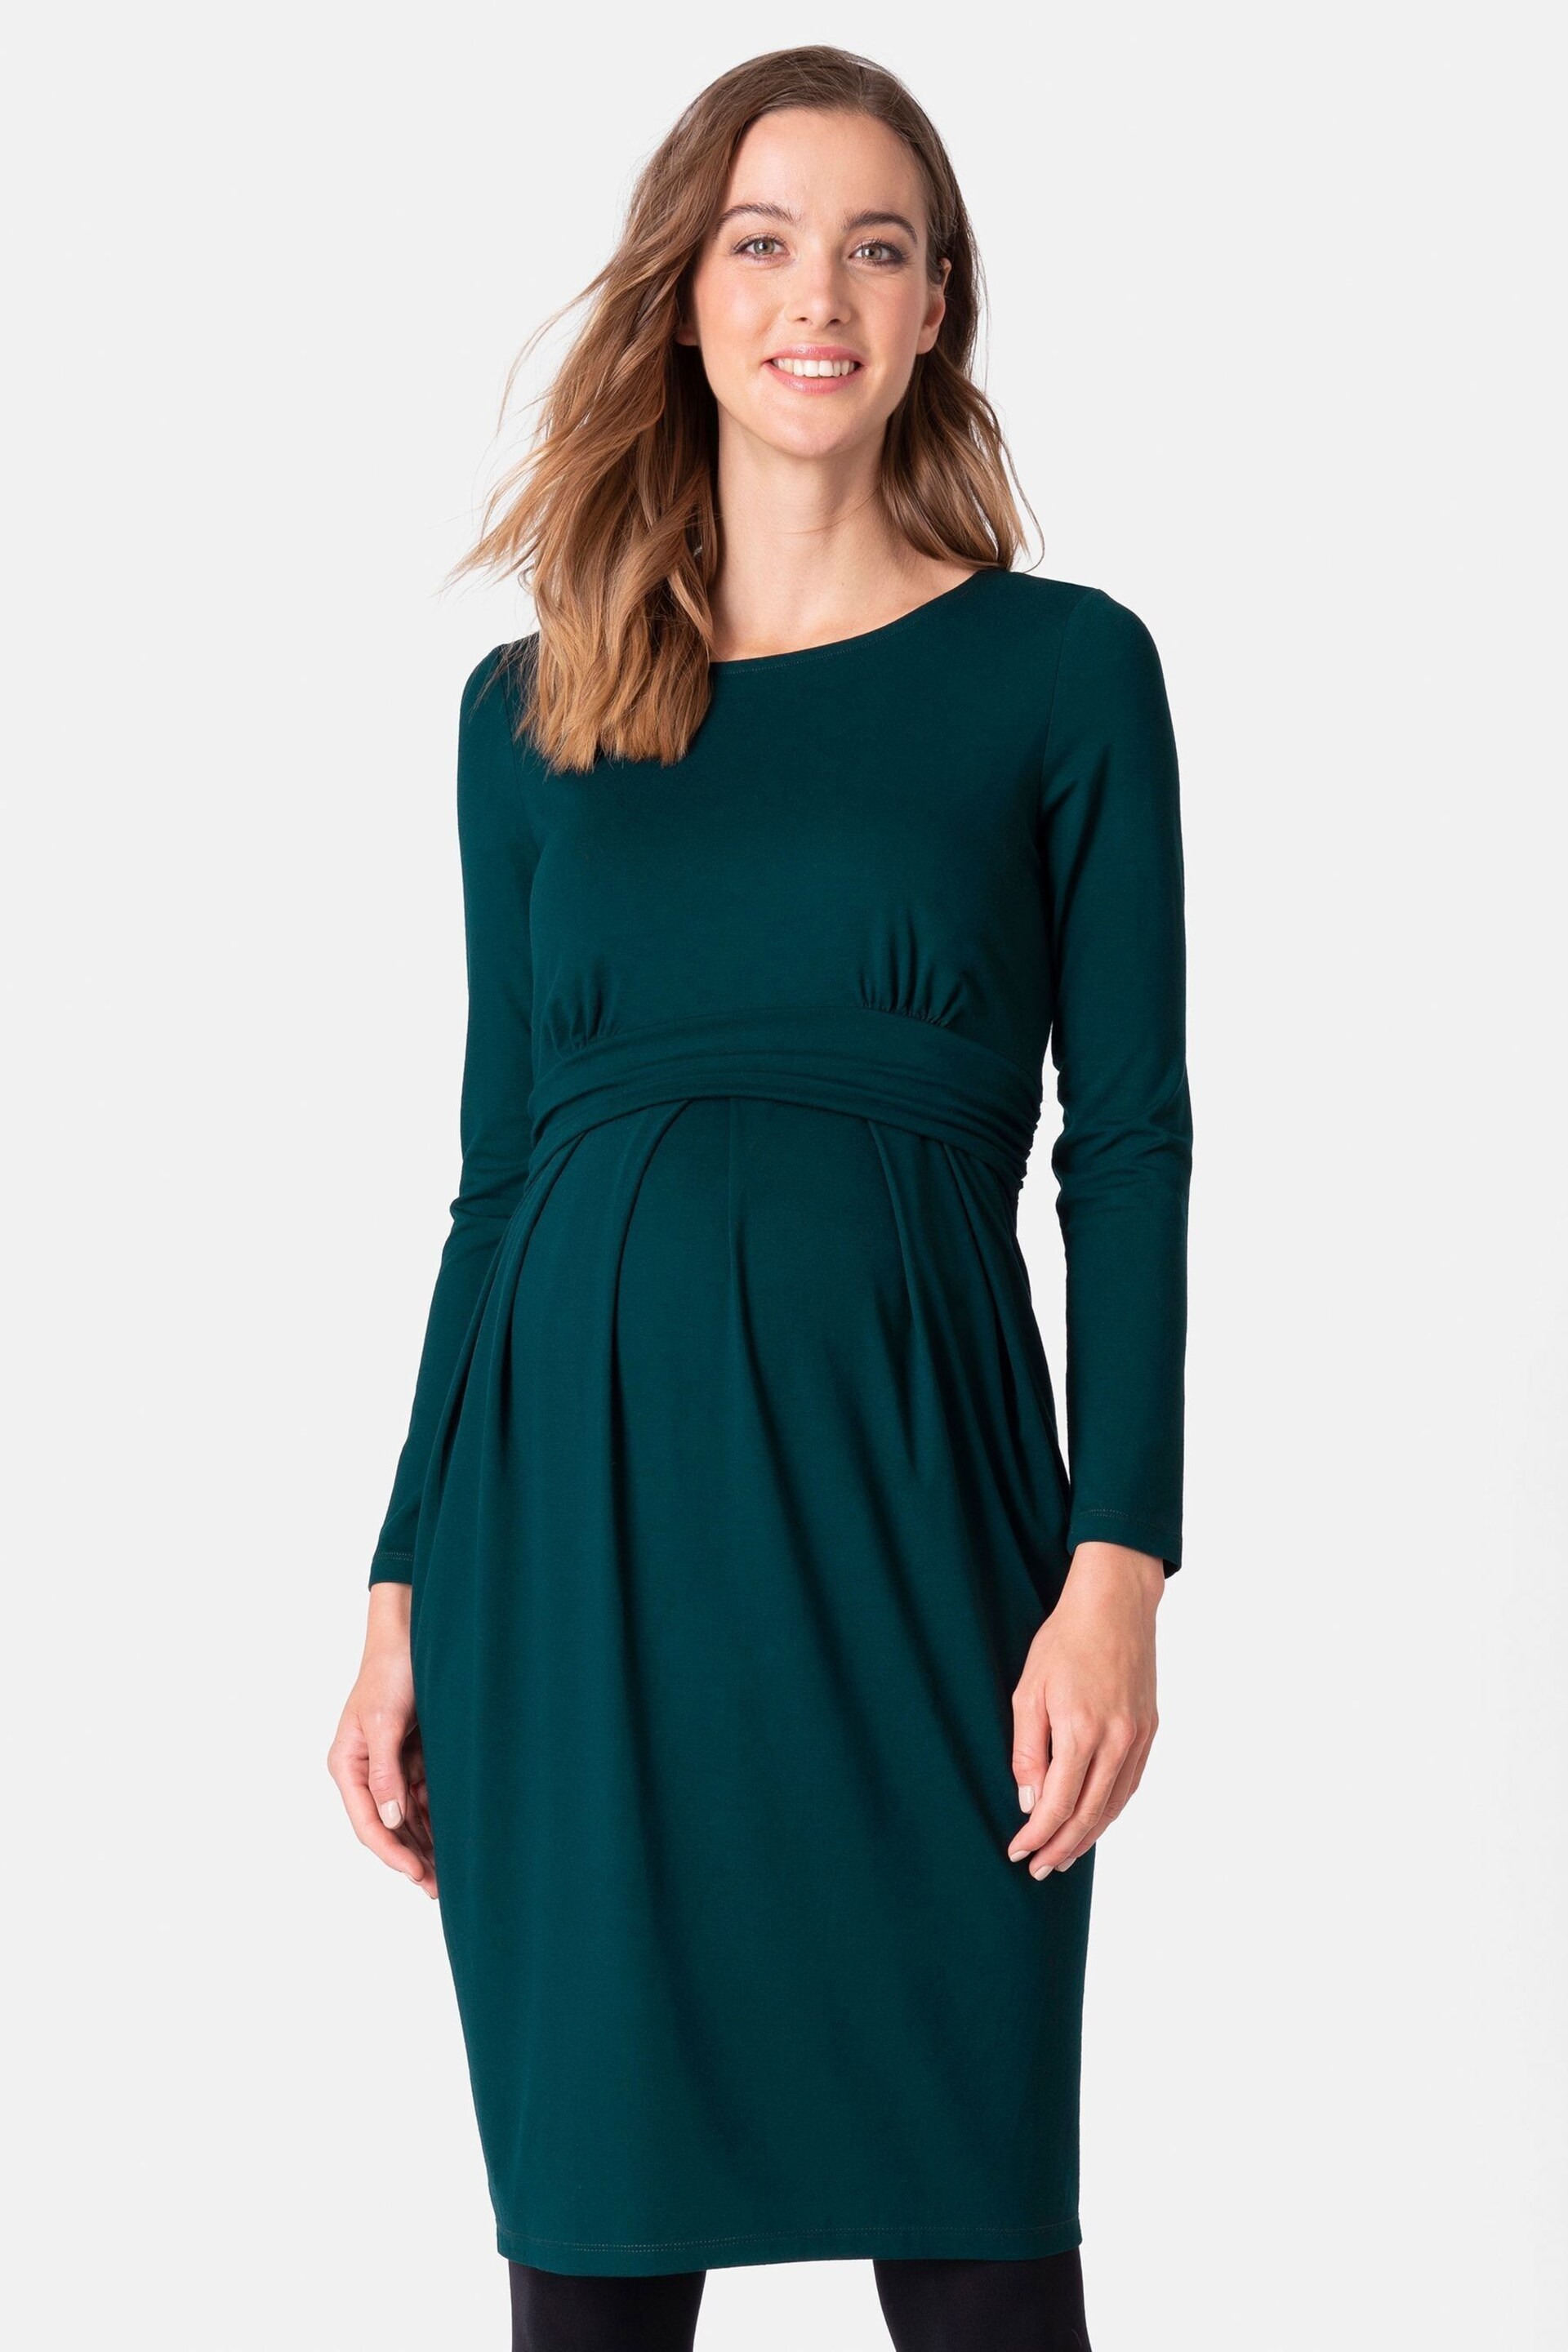 Seraphine Green Maternity And Nursing Pleat Detail Dress - Image 1 of 4